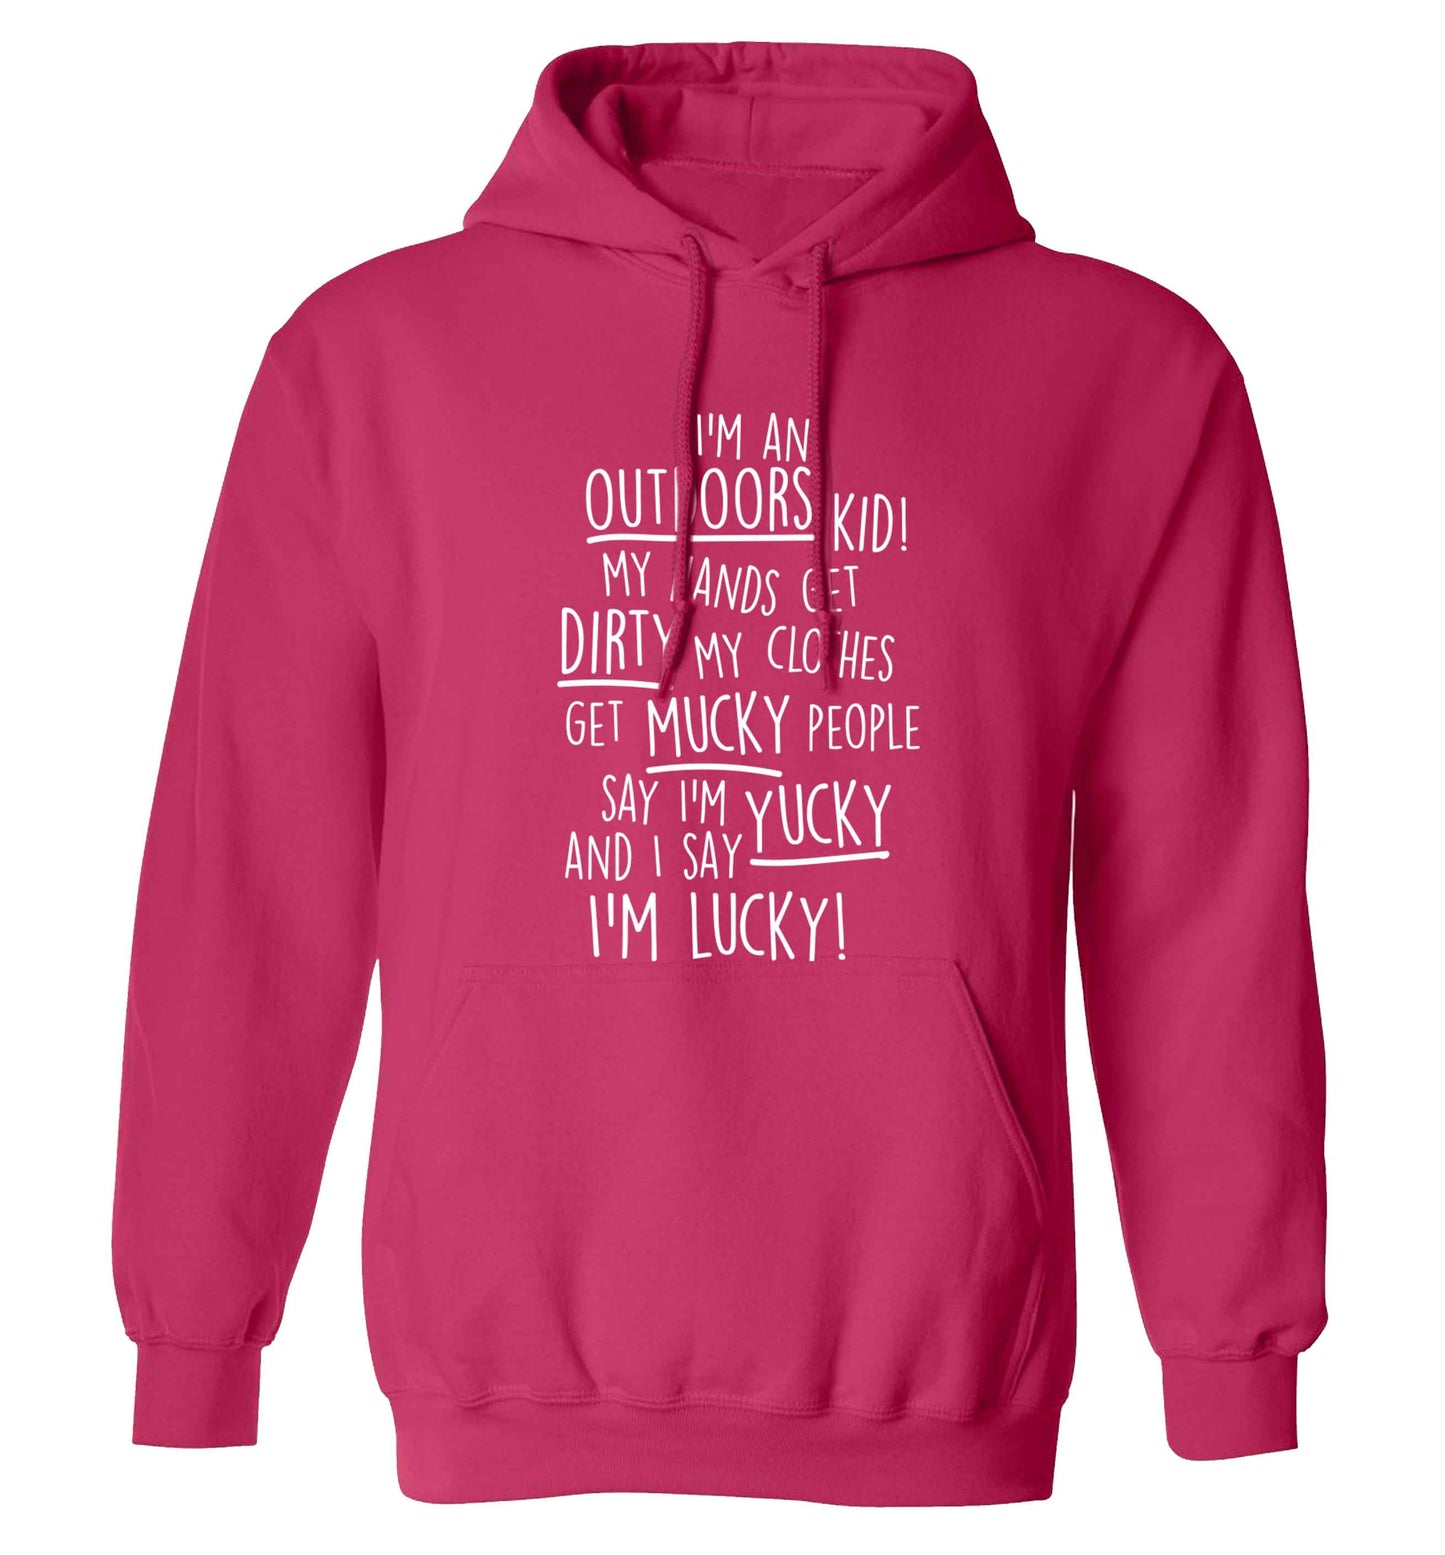 I'm an outdoors kid poem adults unisex pink hoodie 2XL